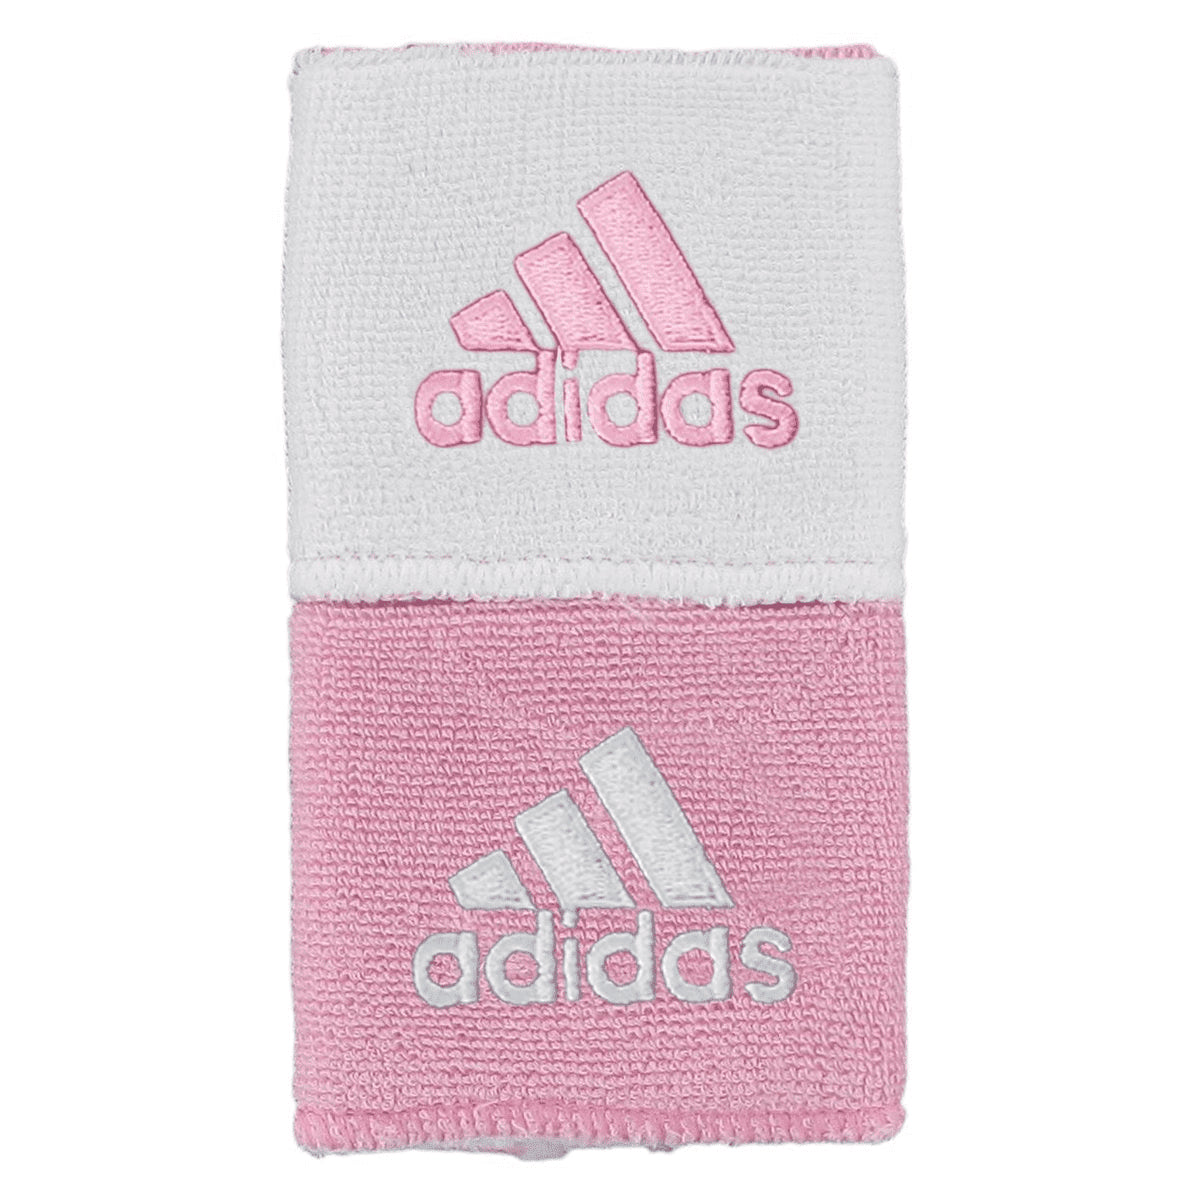 adidas Interval Reversible Wristband  Light Pink/White (Both Sides)